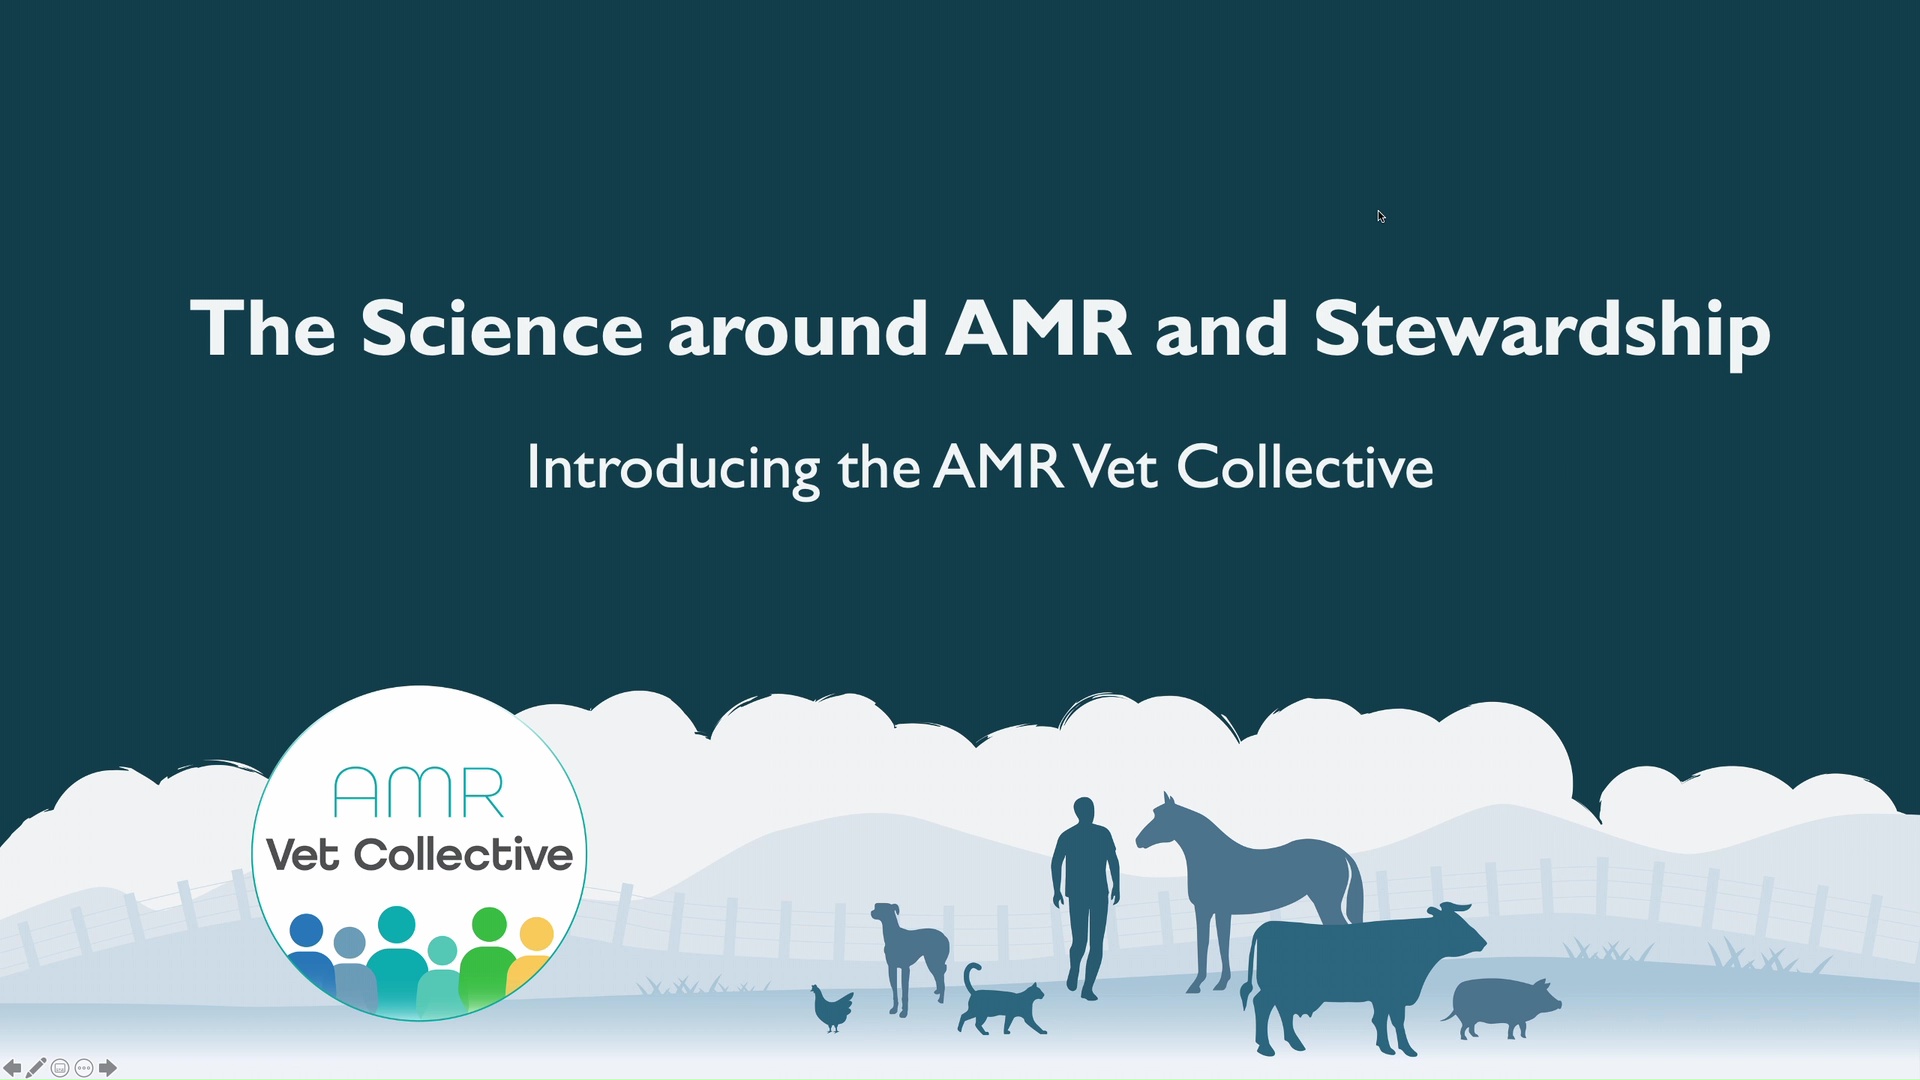 The Science Around AMR and Stewardship